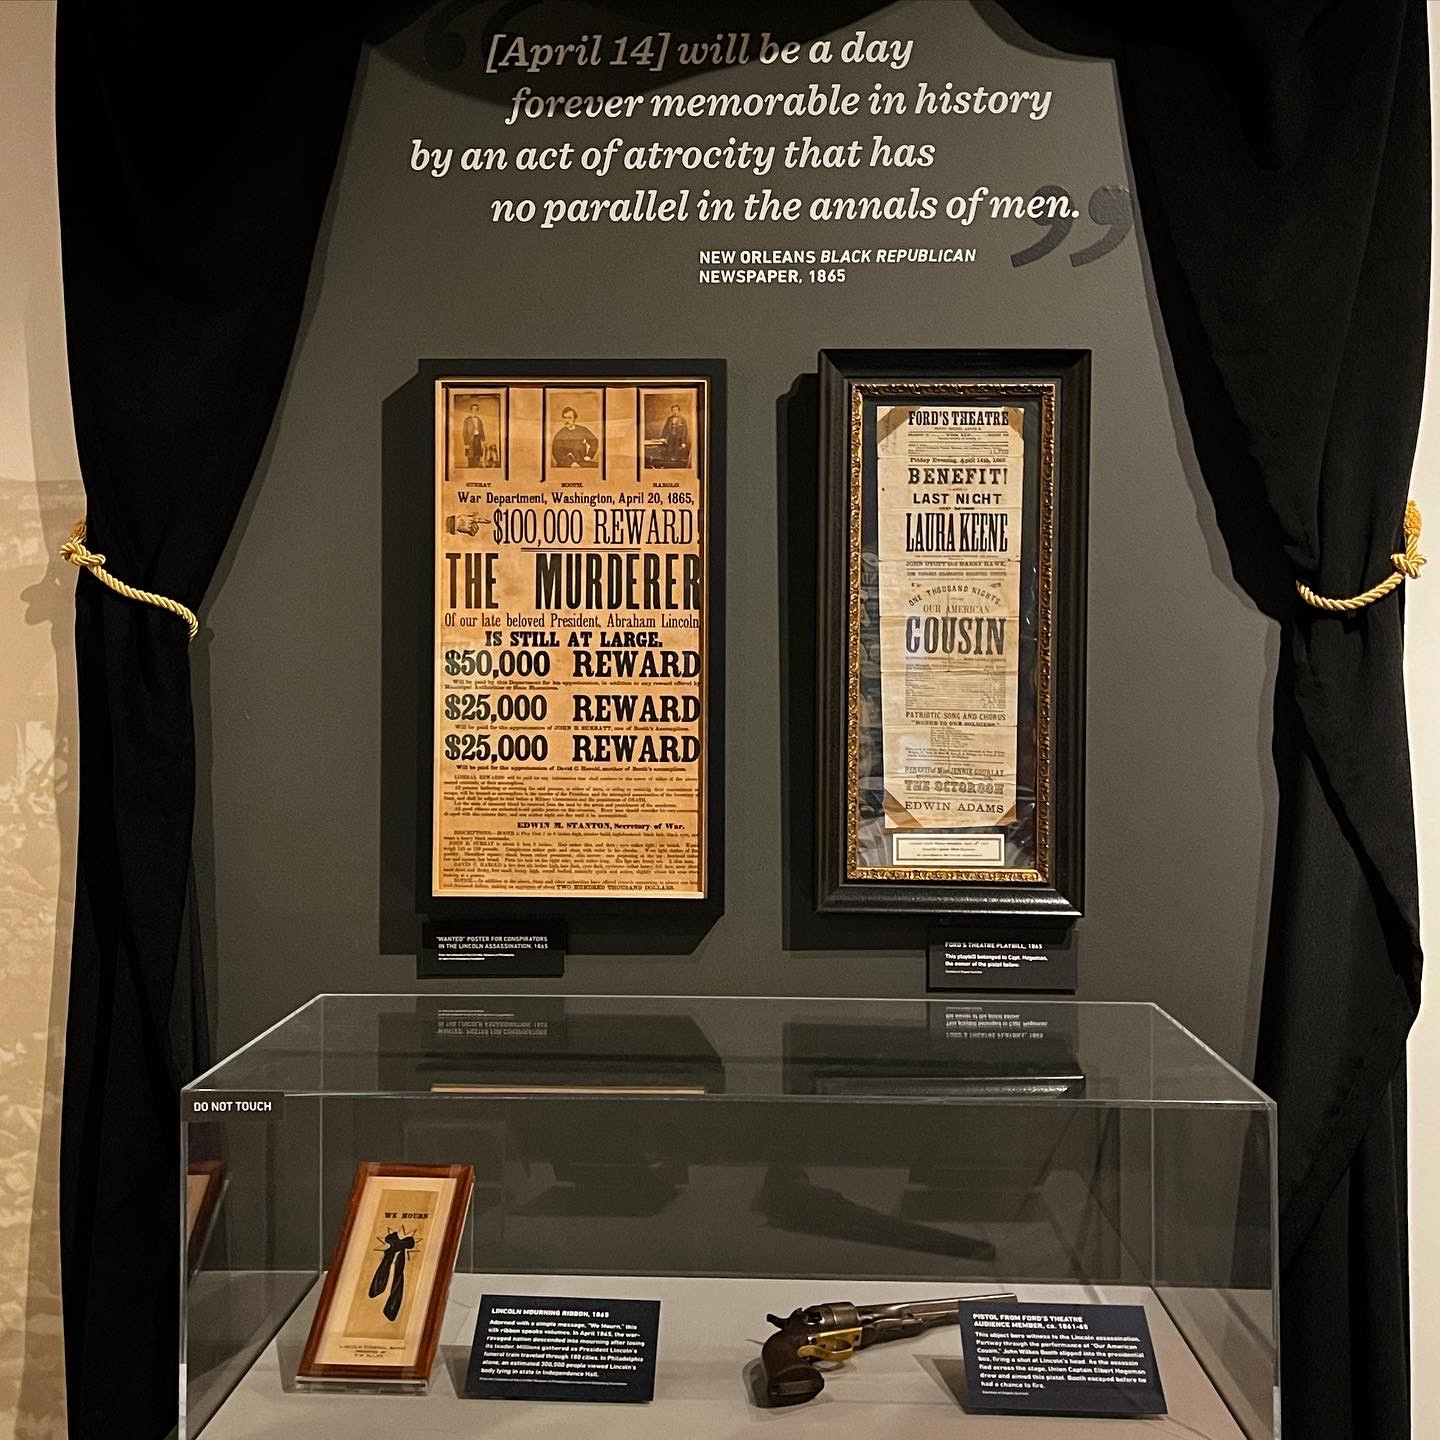 An original John Wilkes Booth wanted poster, which was treated and housed at CCAHA, in a display with other related objects at the National Constitution Center